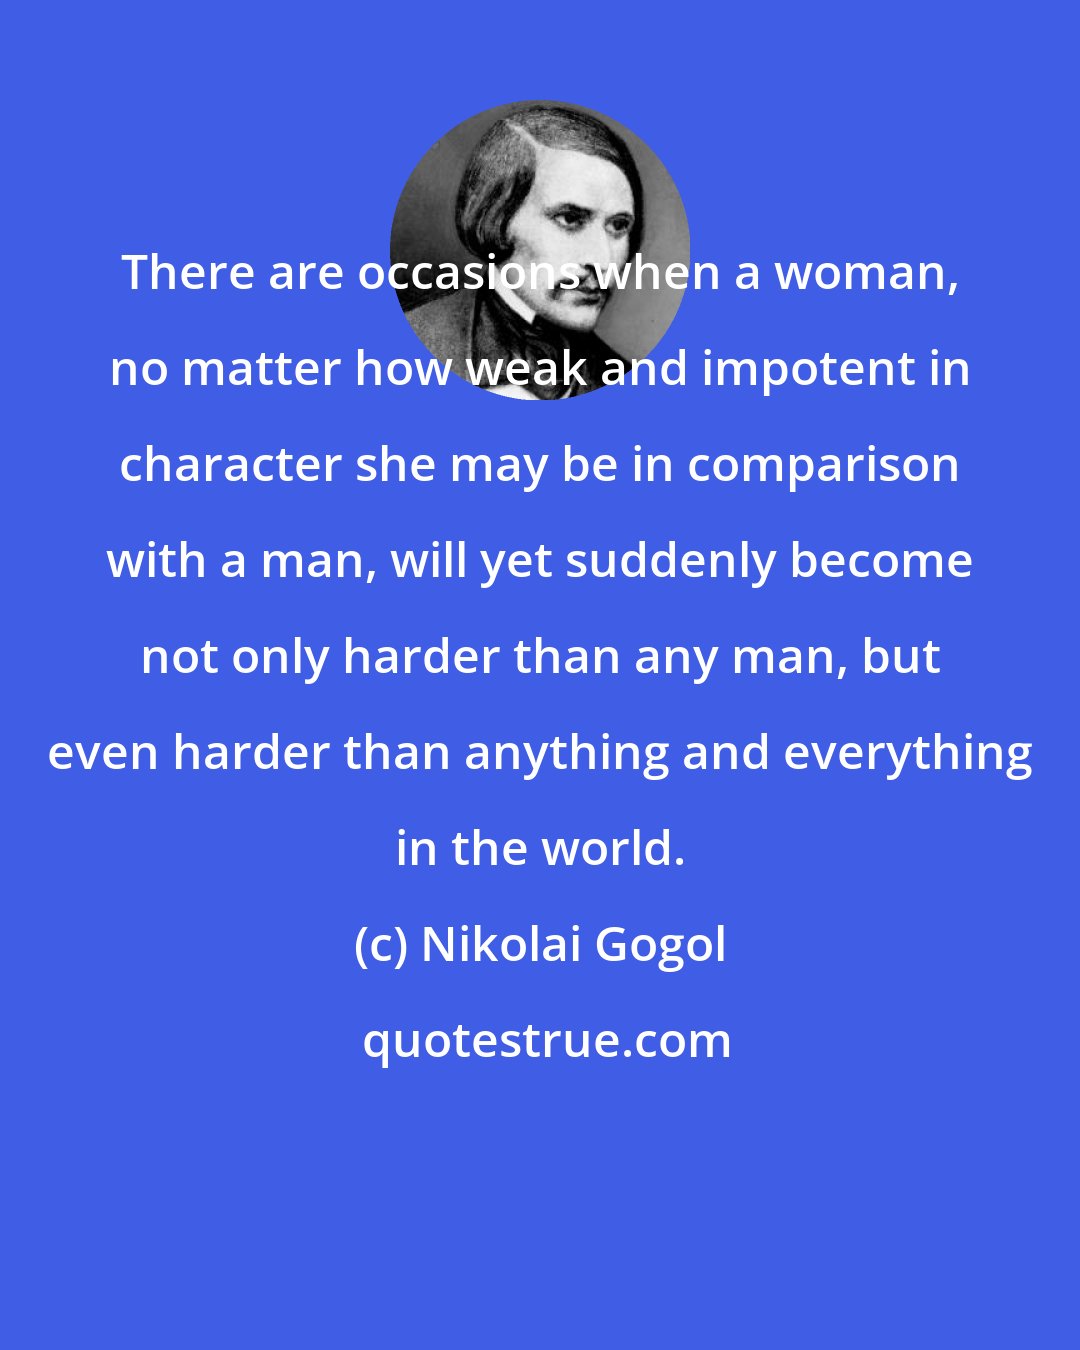 Nikolai Gogol: There are occasions when a woman, no matter how weak and impotent in character she may be in comparison with a man, will yet suddenly become not only harder than any man, but even harder than anything and everything in the world.